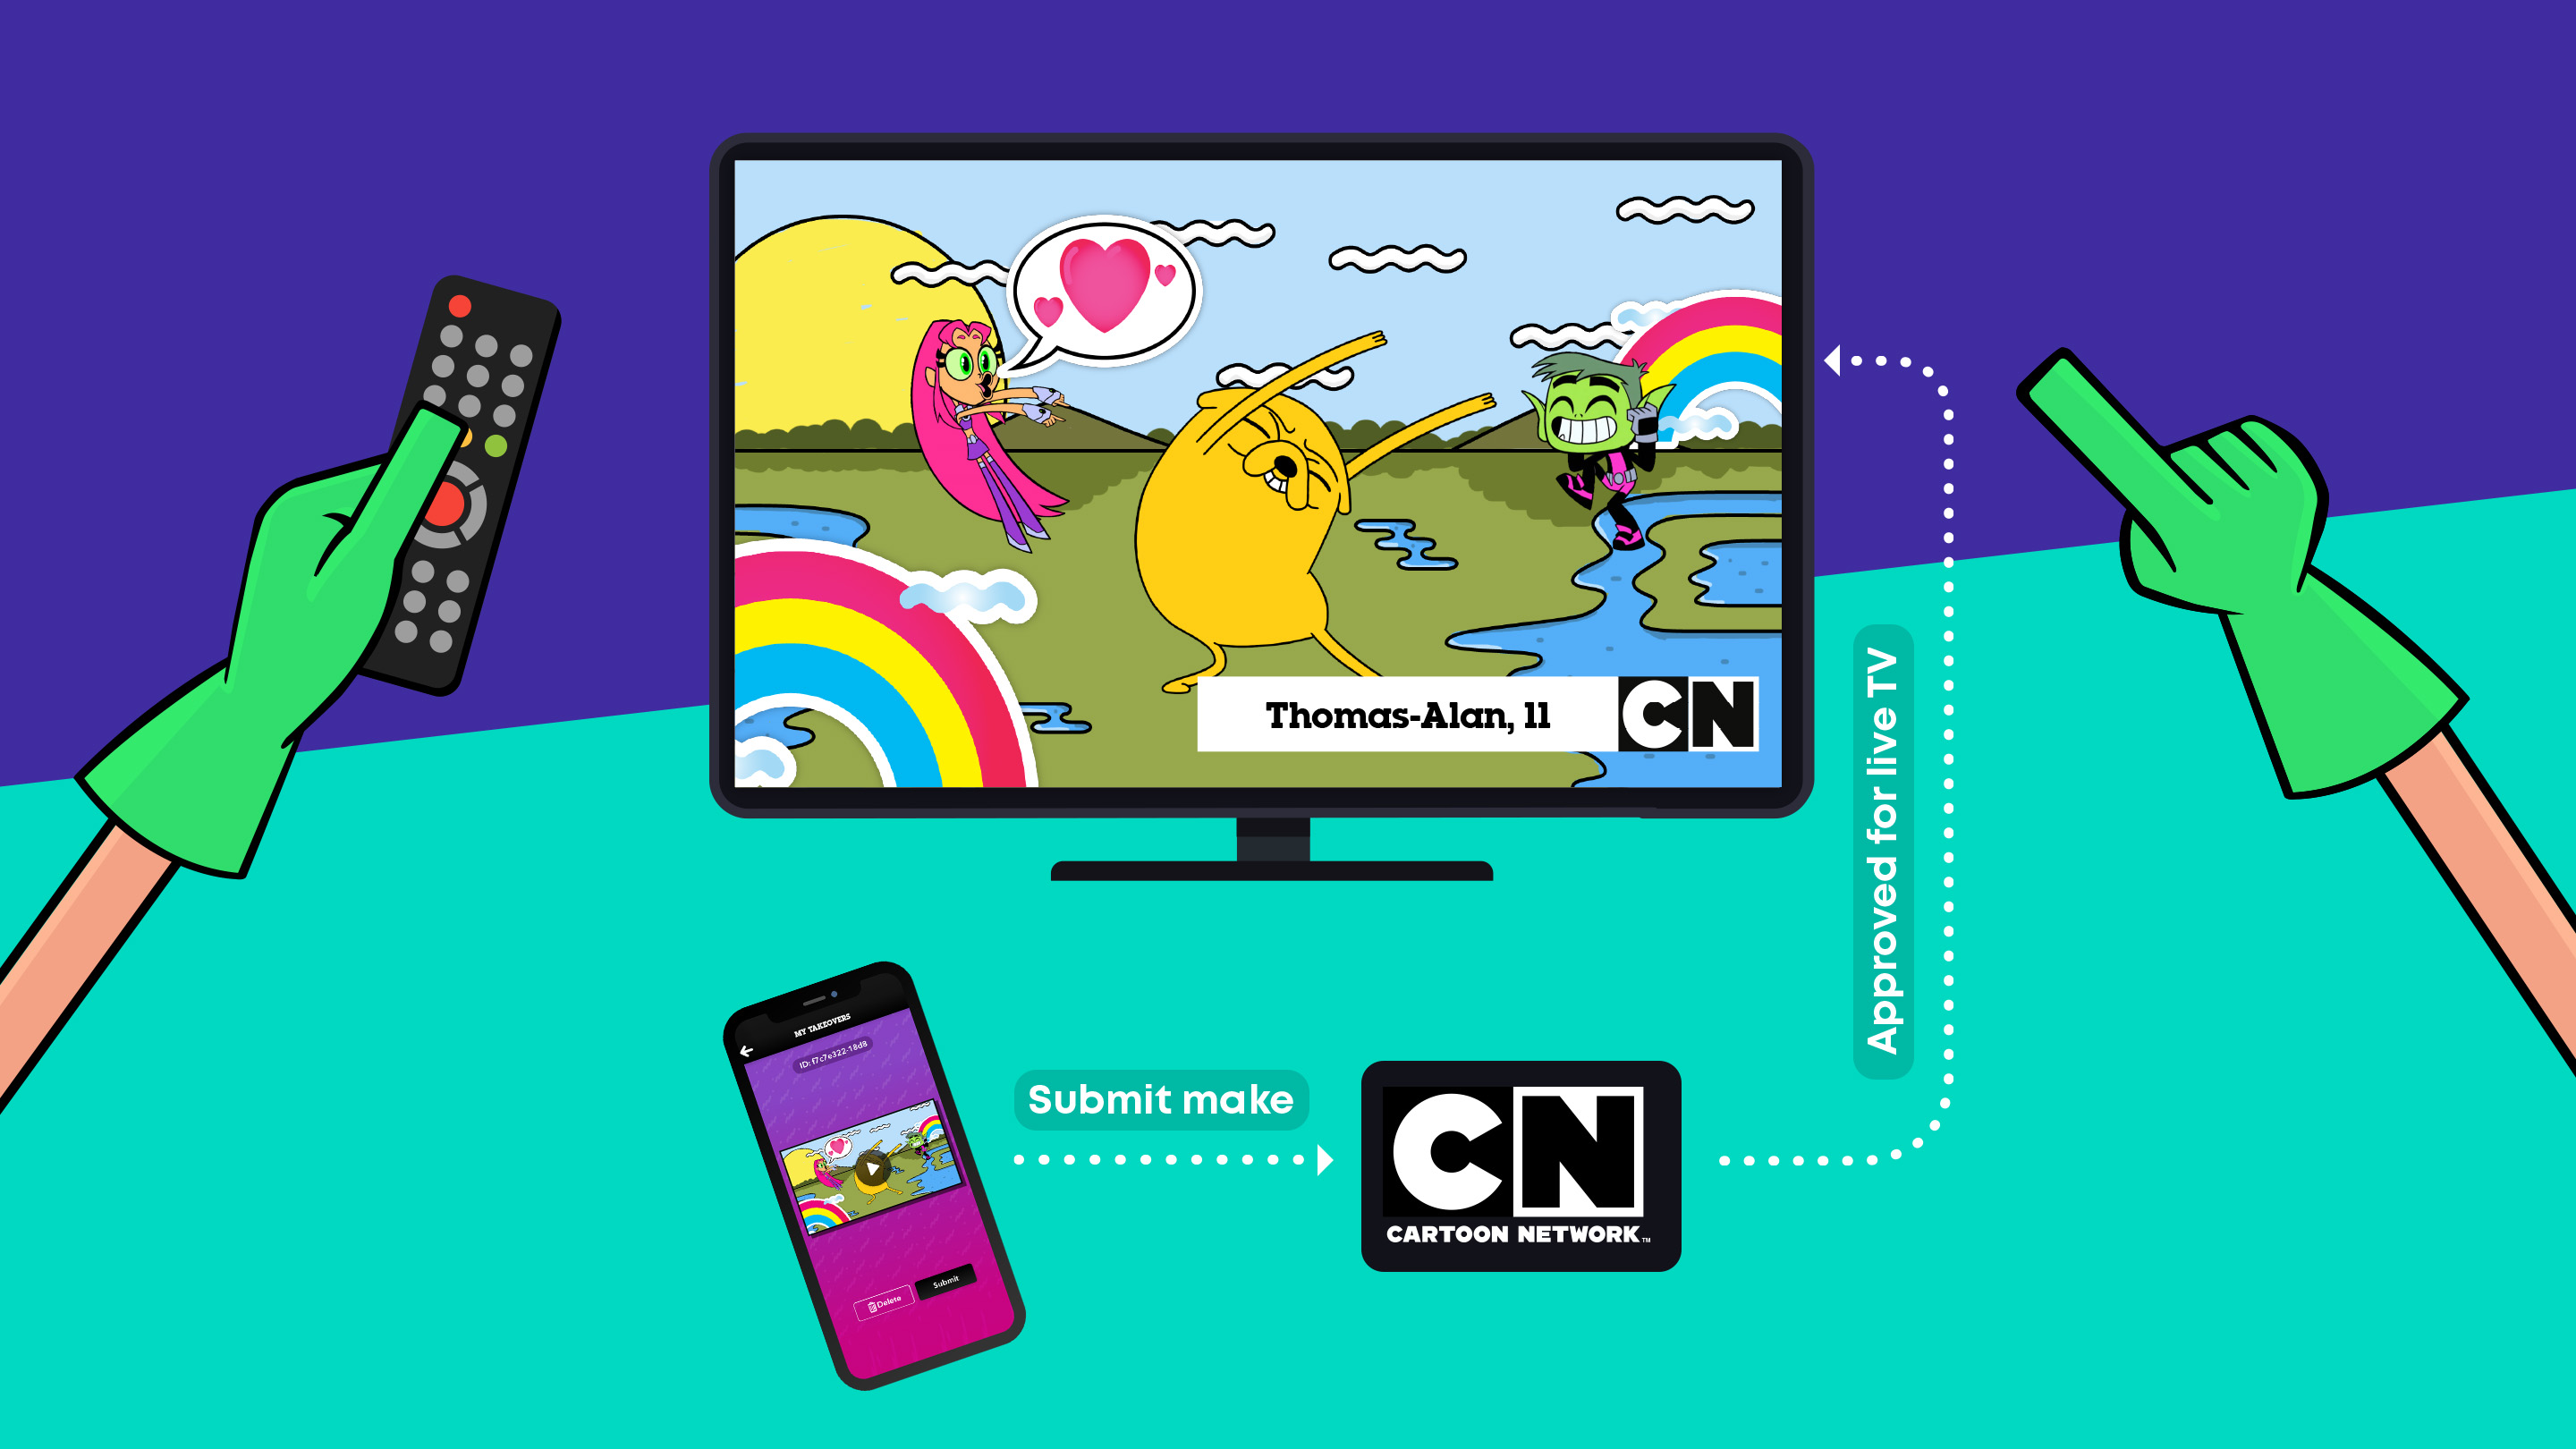 Cartoon Network app diagram showing how your creation appears on TV